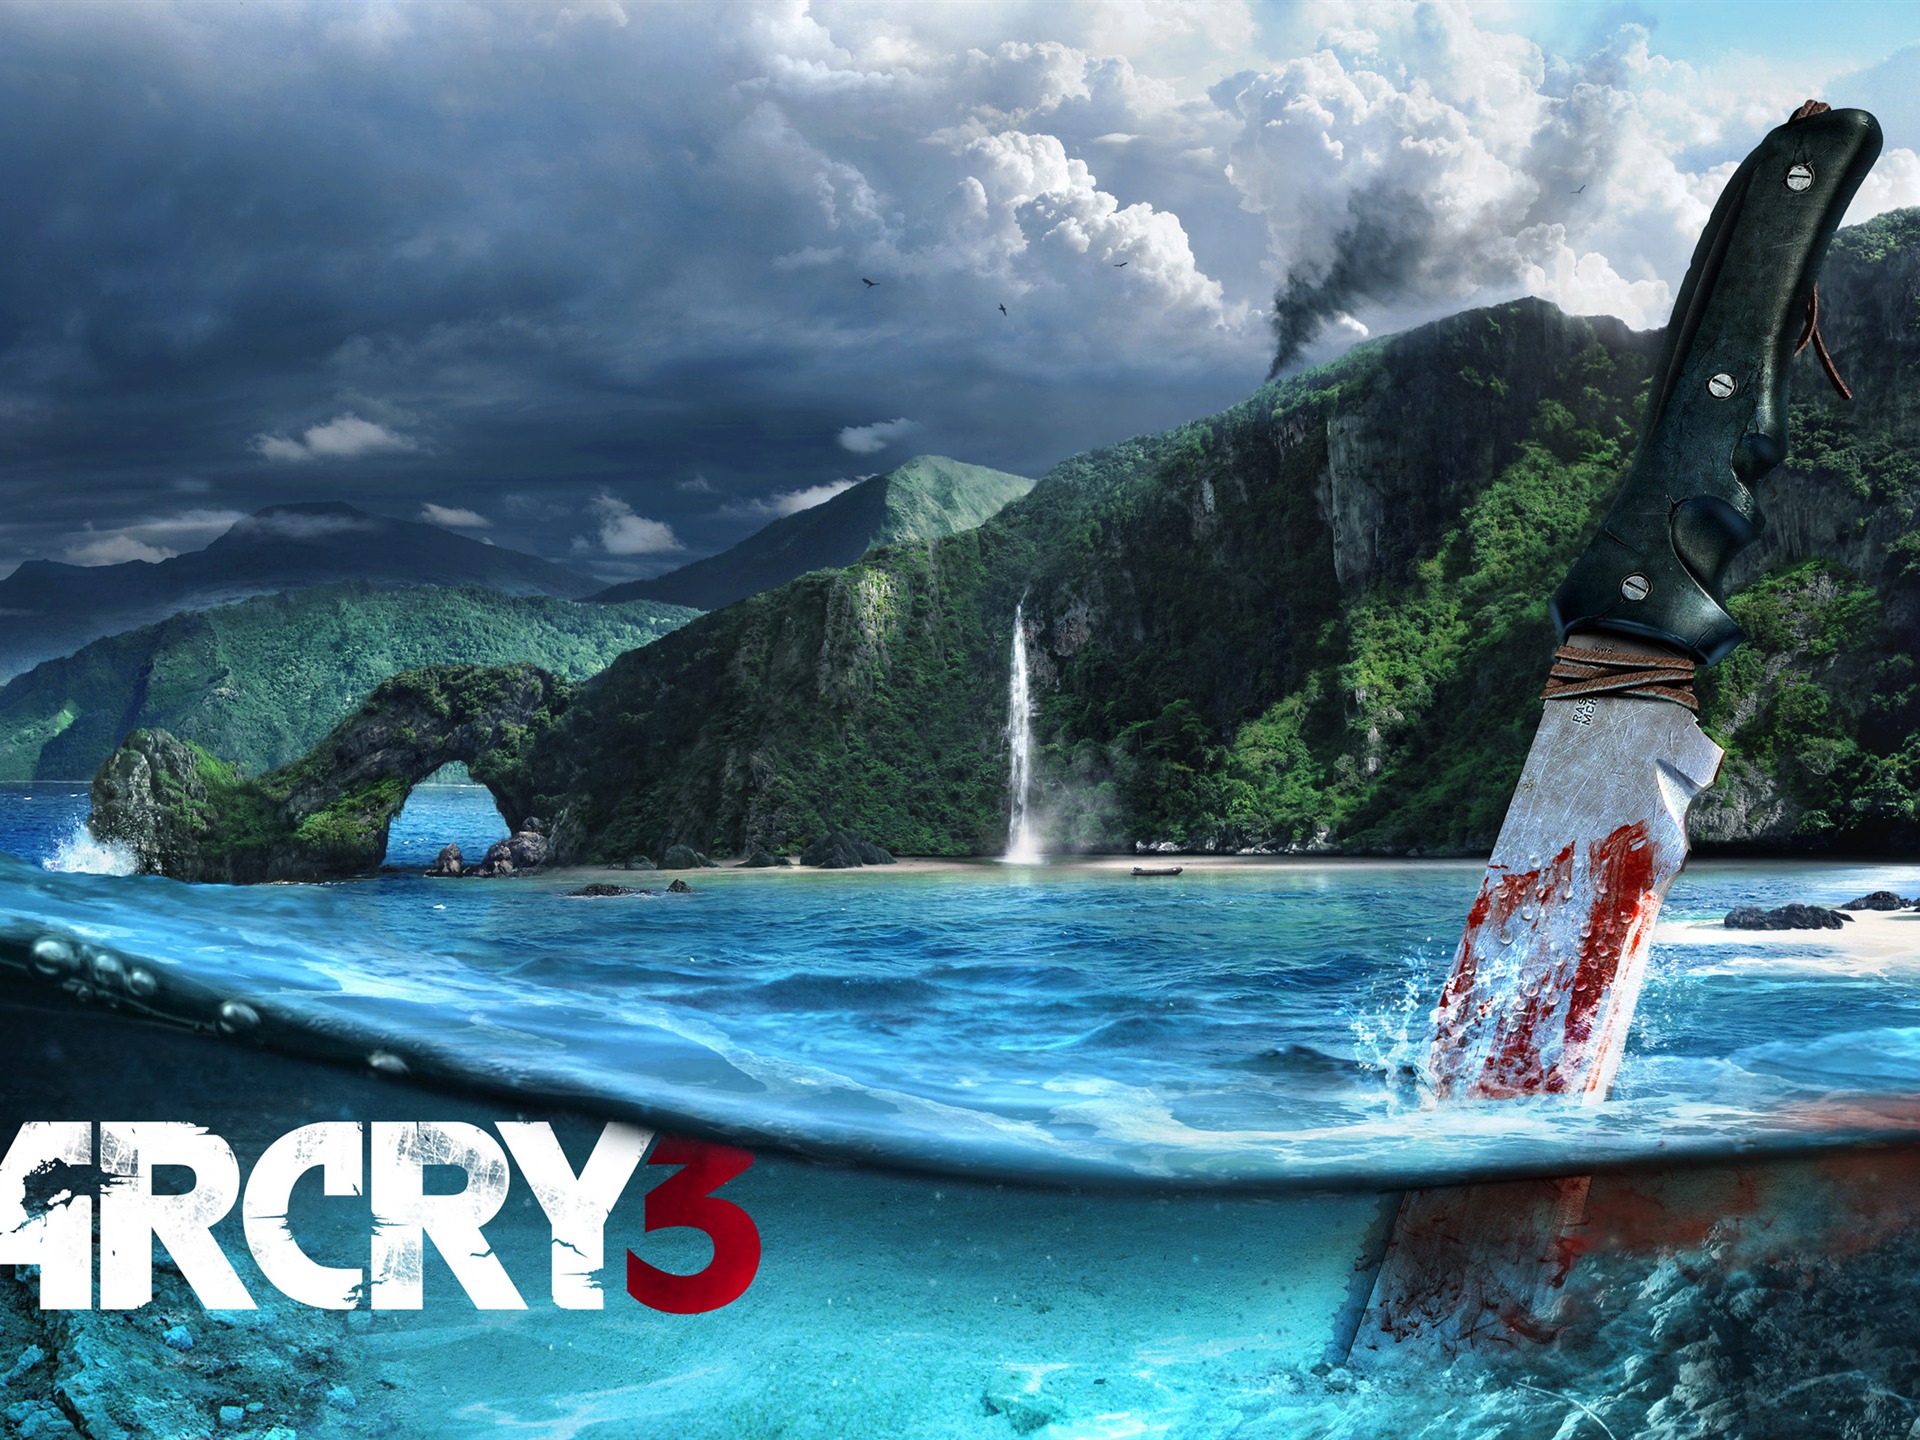 Far Cry 3 HD wallpapers #8 - 1920x1440